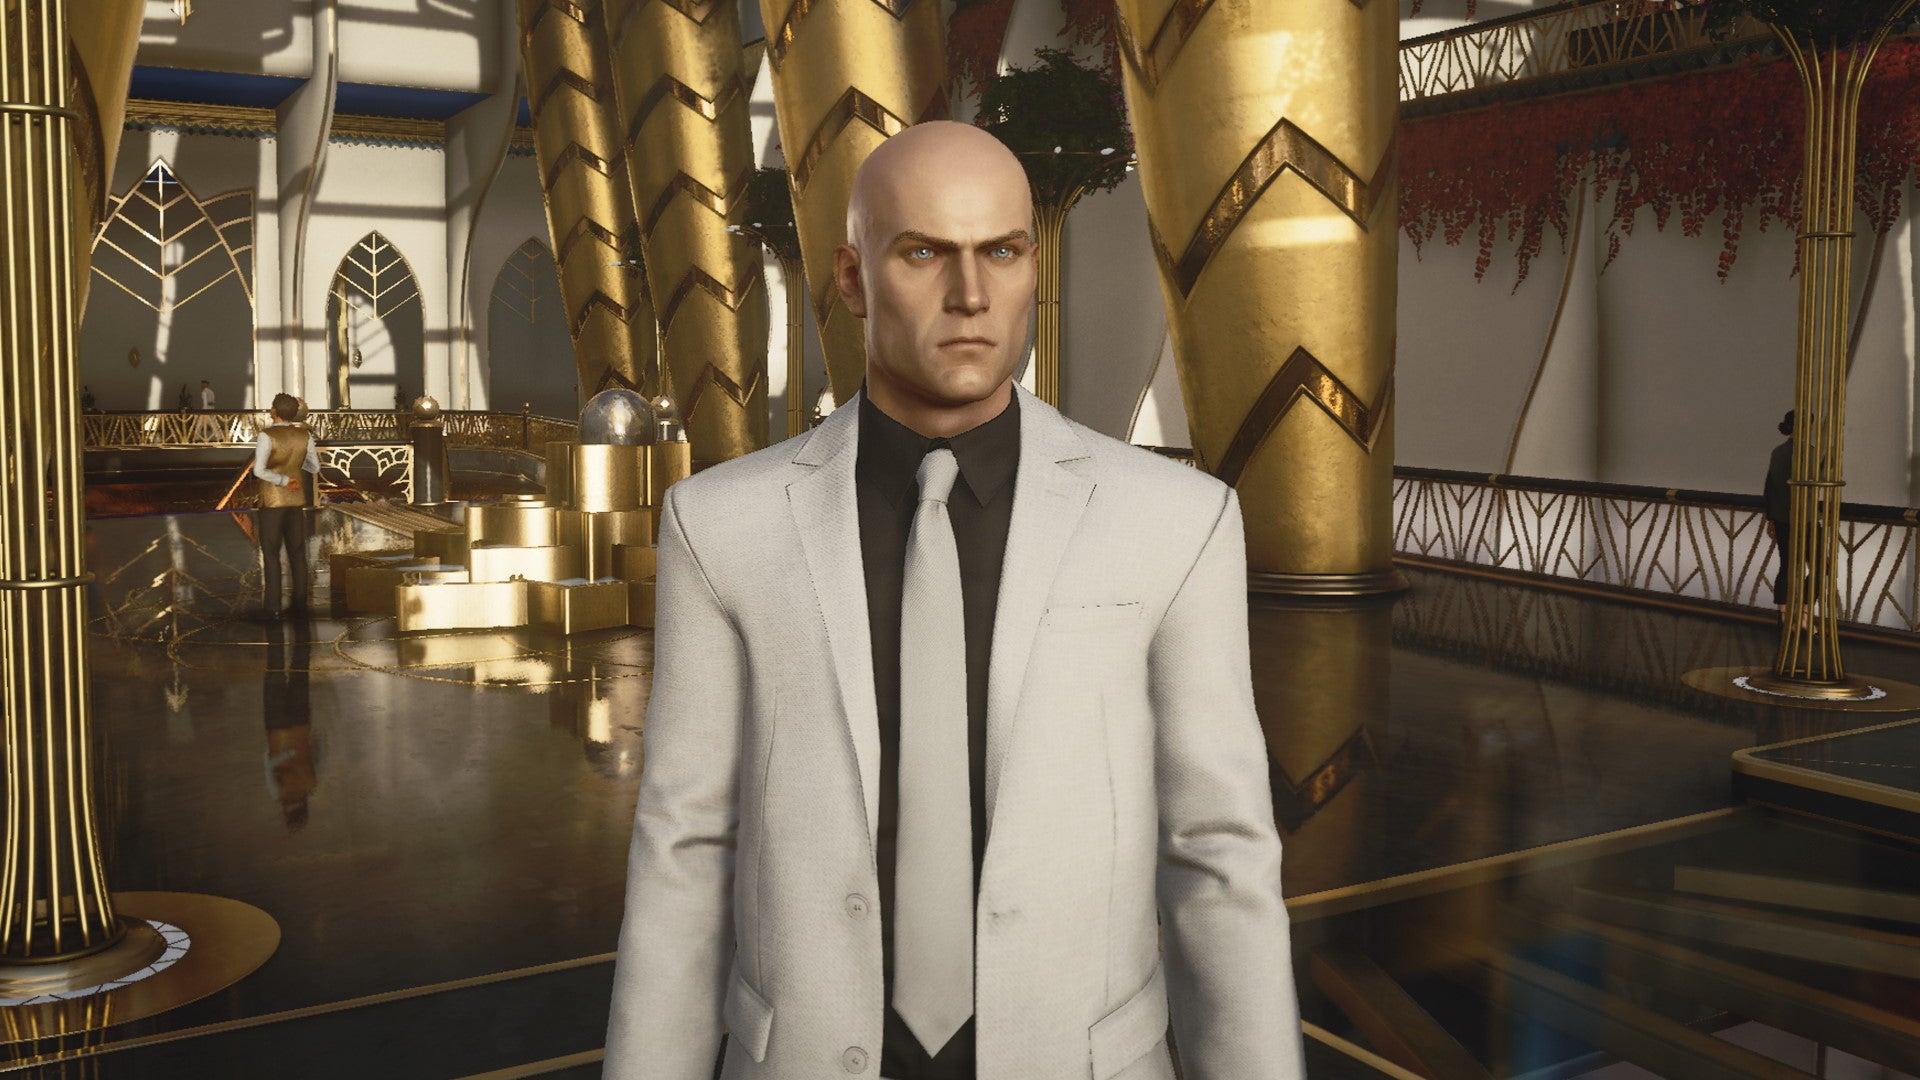 A screenshot of Agent 47 in a sharp looking suit from Hitman 3's Dubai level